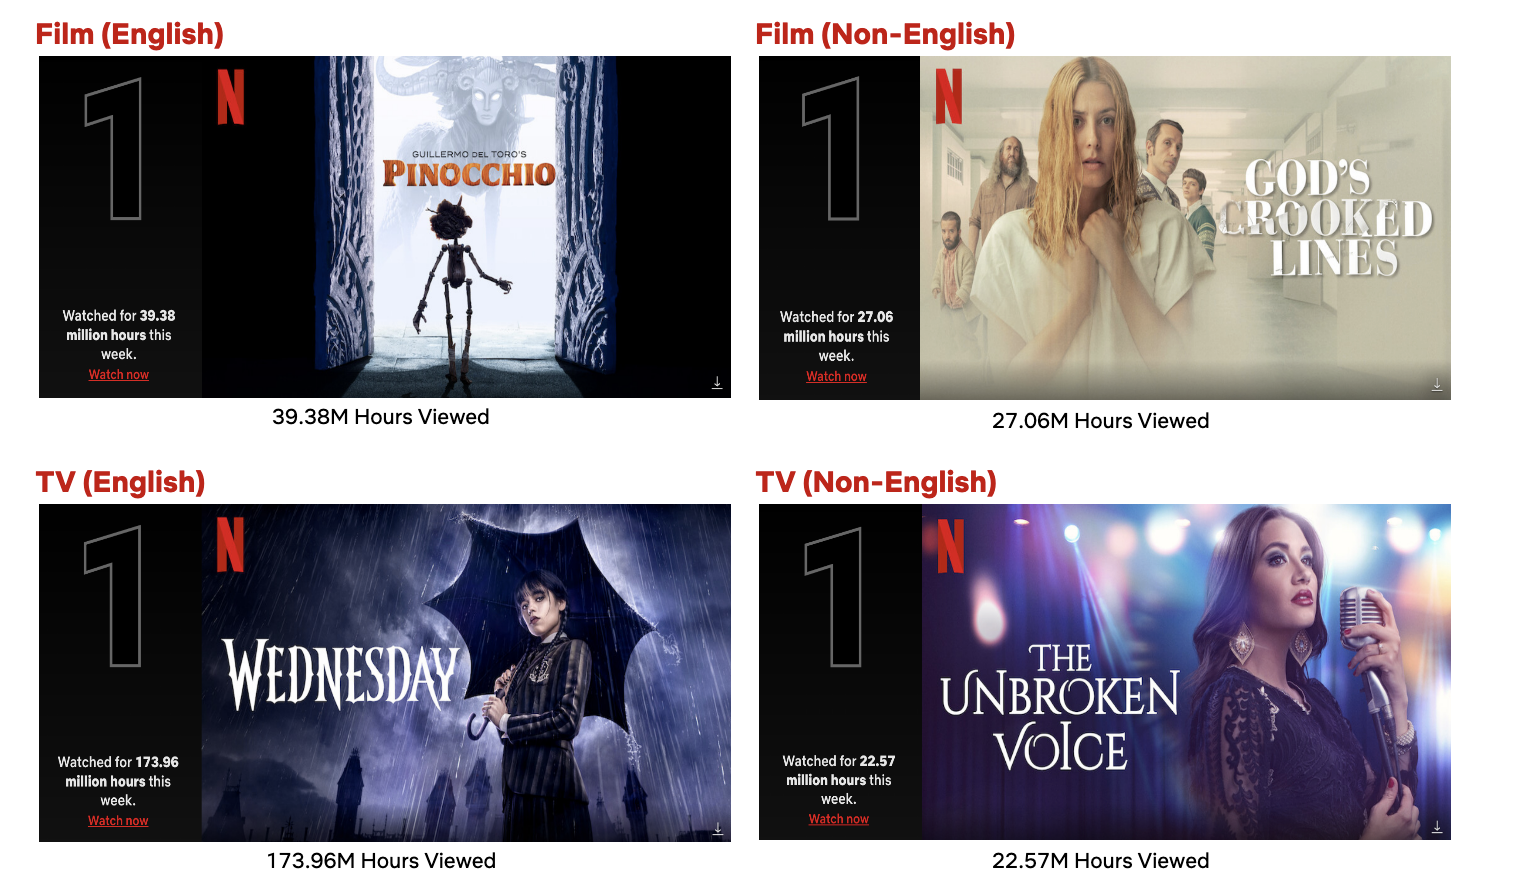 Top 10 Week of 12: 'Wednesday' Is the Viewed Title This Week; 'Guillermo del Toro's Pinocchio' Is the #1 Film - Netflix